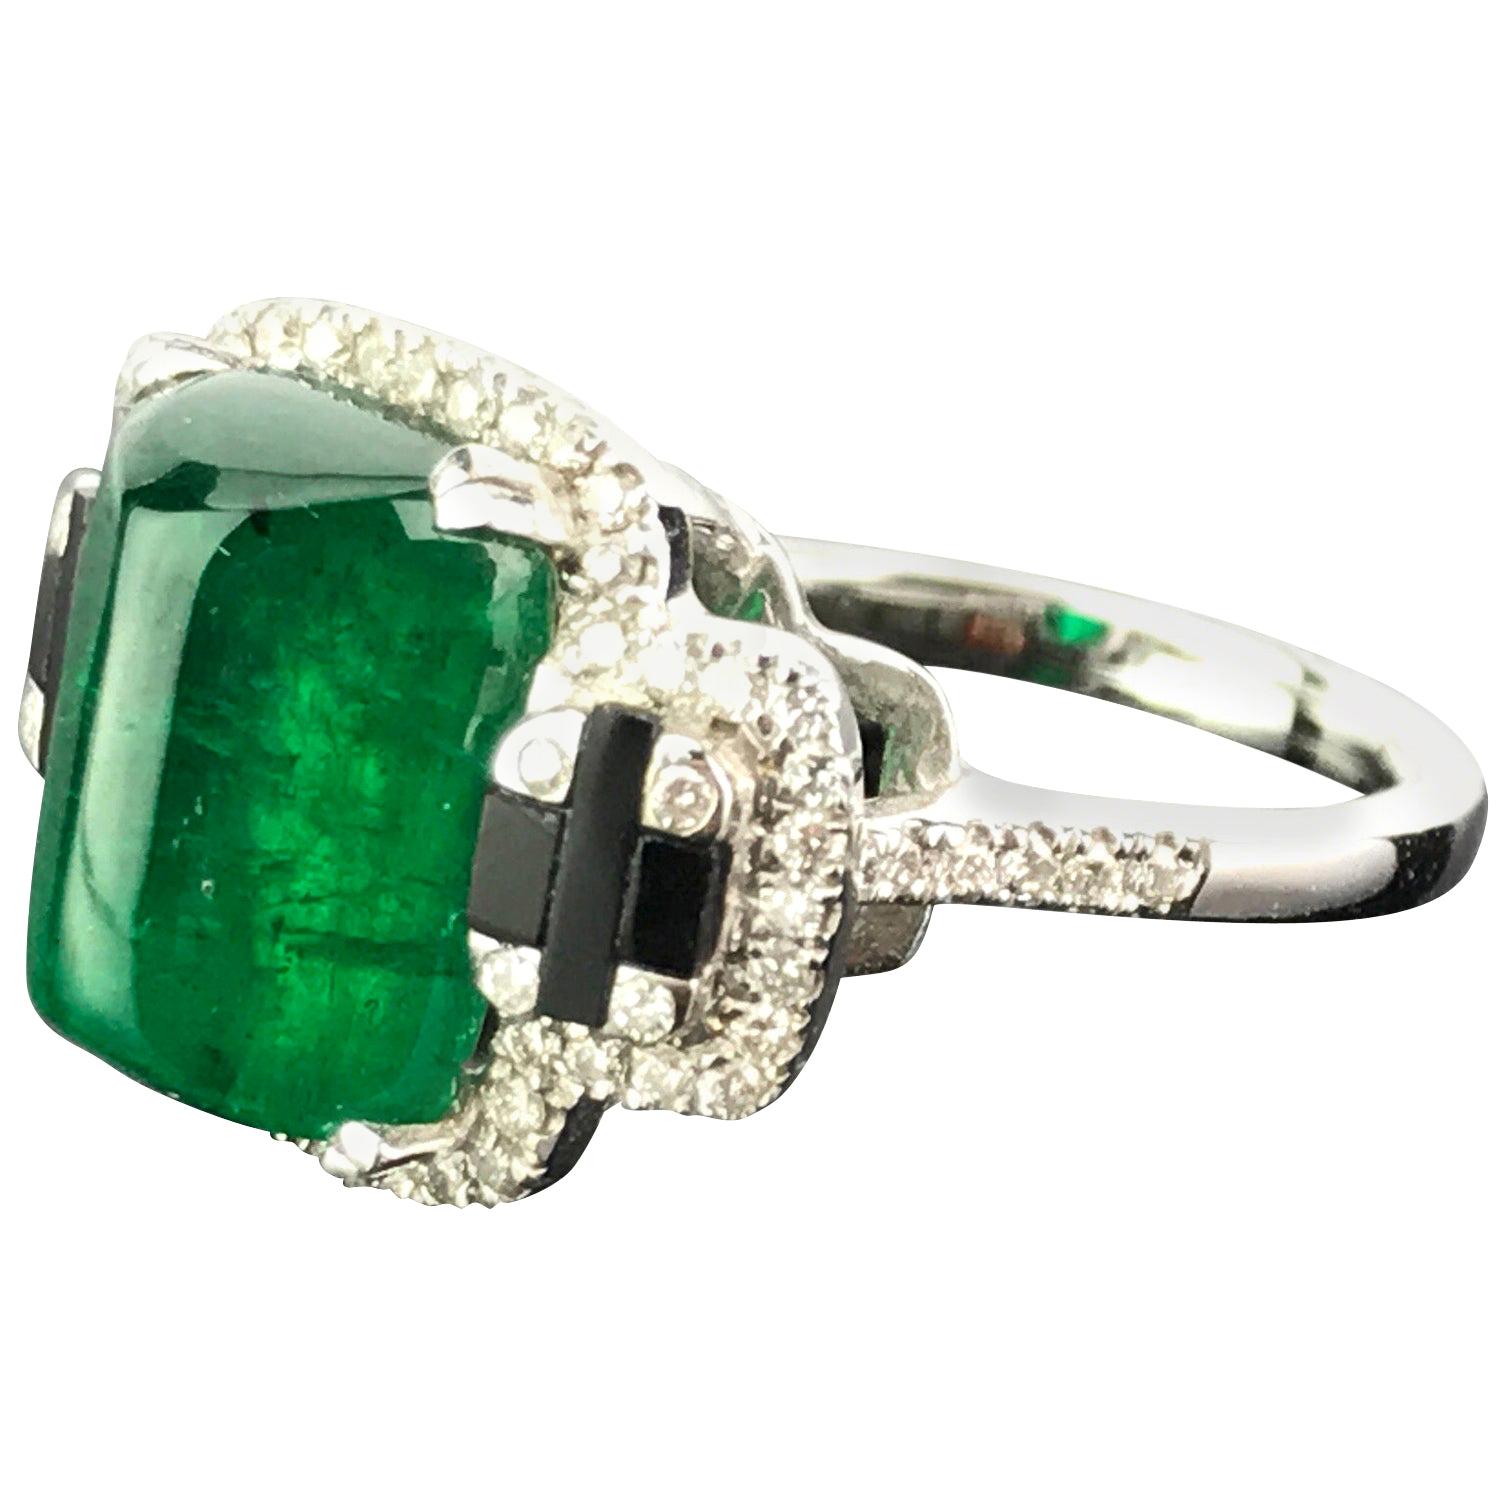 5.62 Carat Sugarloaf Shaped Emerald, Diamond and Black Onyx Cocktail Ring